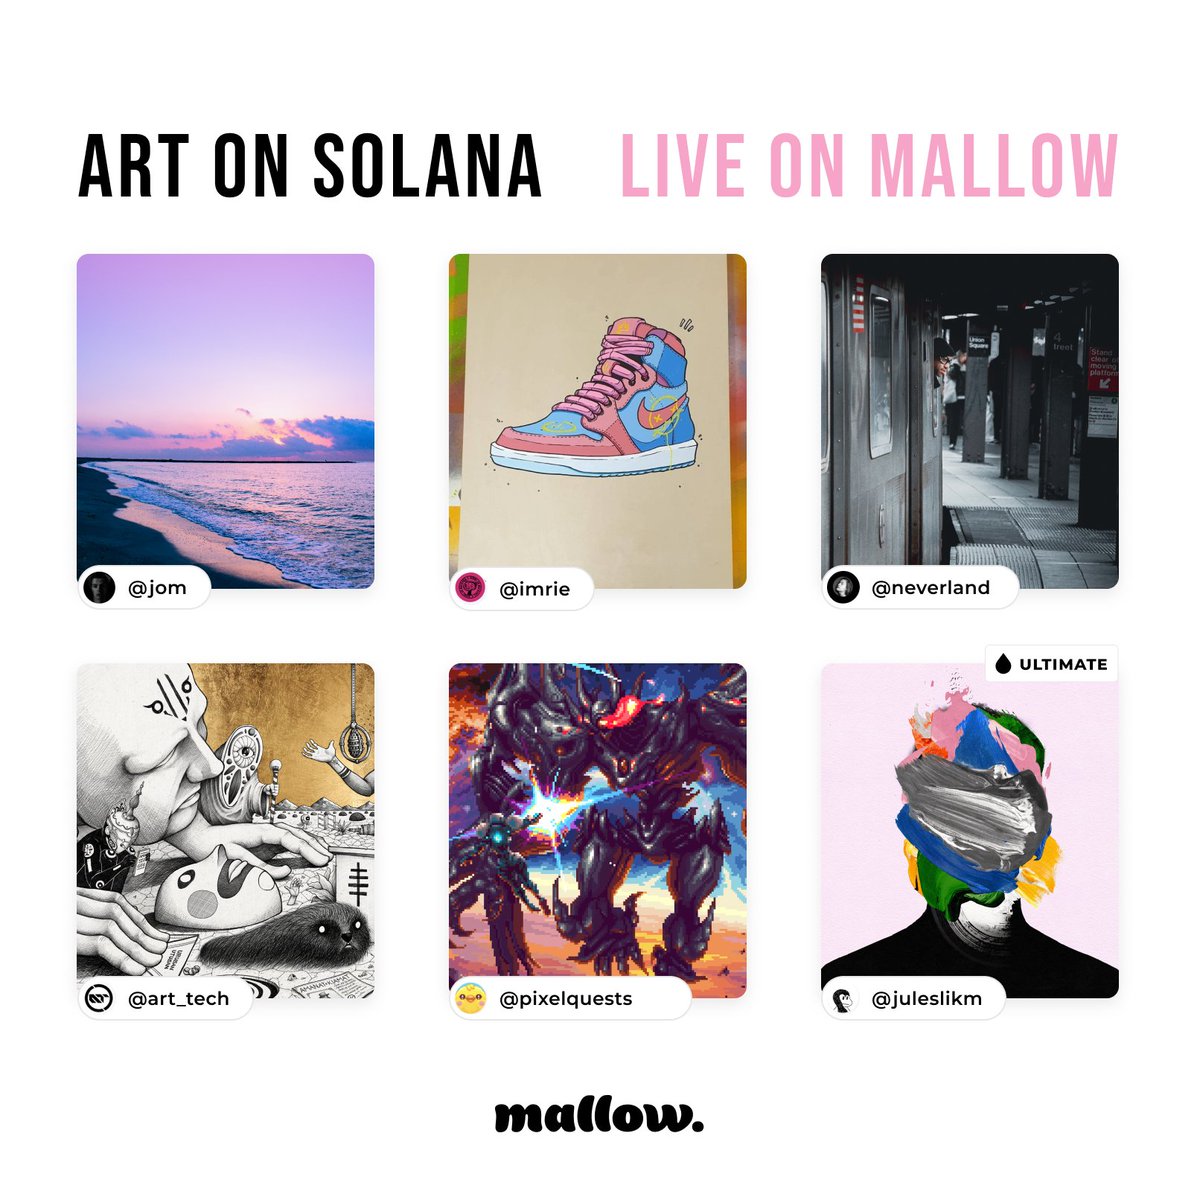 brunch anyone? 🥞🍗 enjoy photography, paintings, and moving pixels. 

Share your favorite art on mallow today 🩷

ft. @thejomshoots @Createdby_imrie @XO12XX @arttech_nft @PixellQuests @Mjuleslik